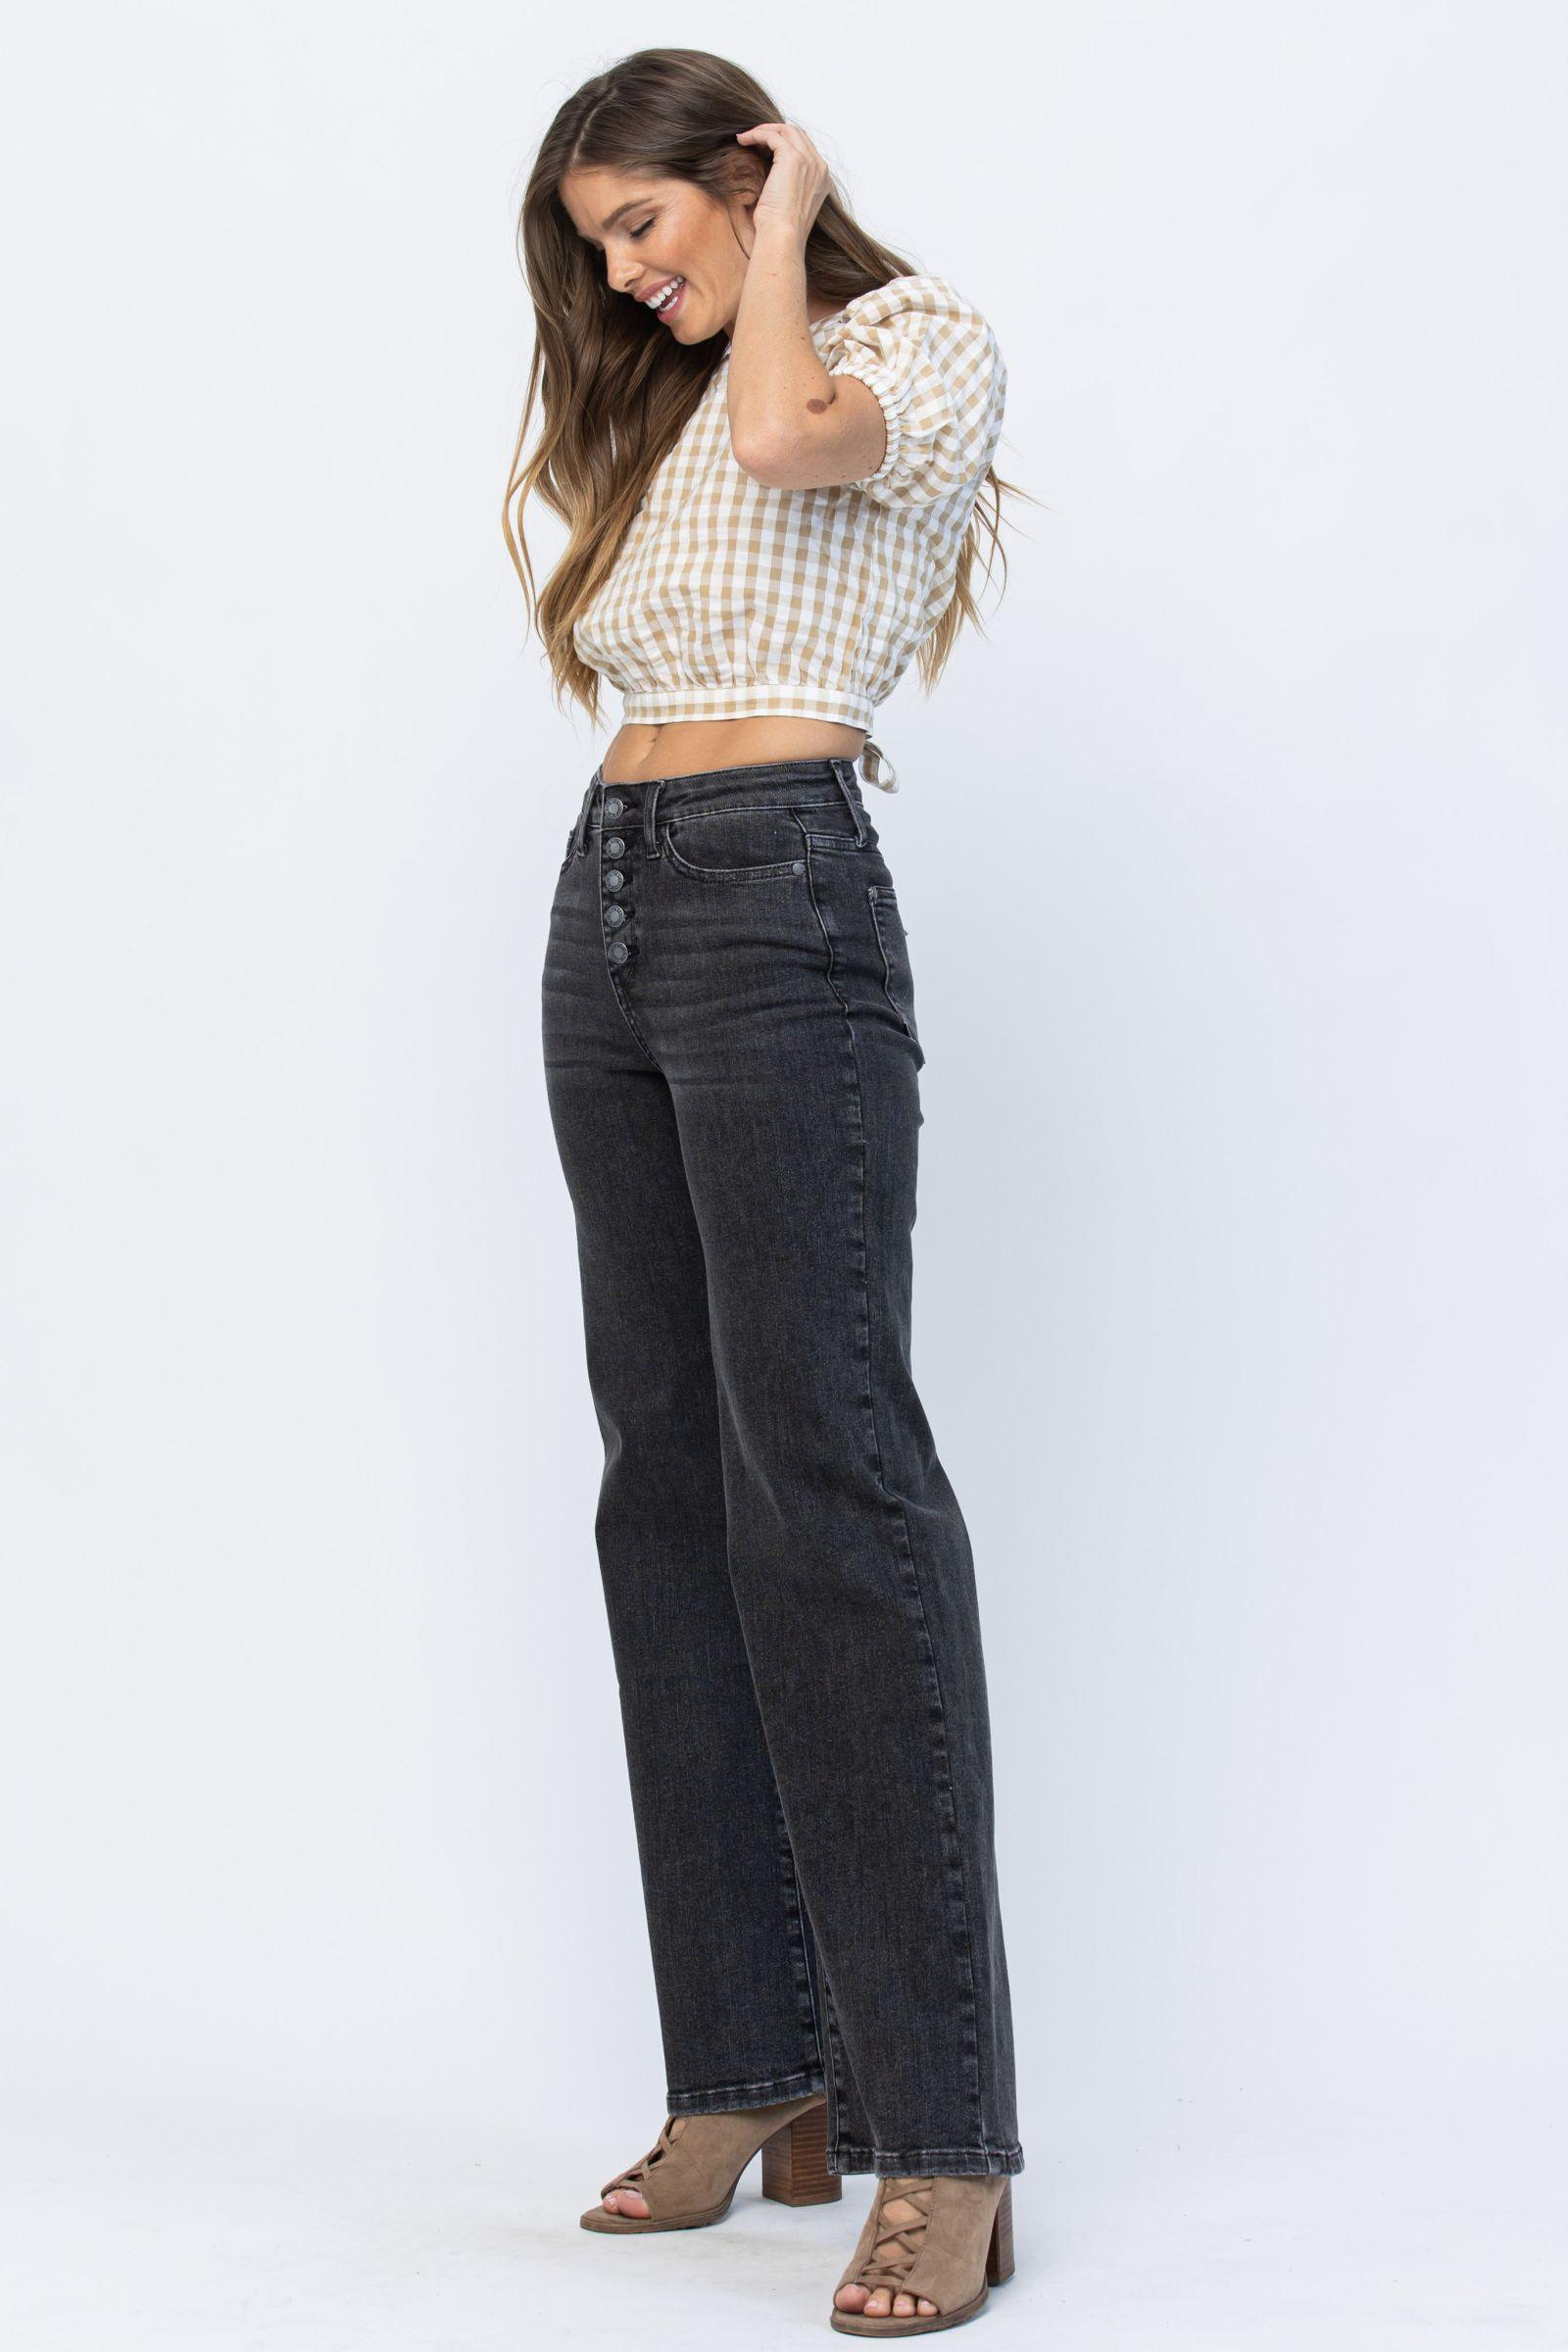 Judy Blue Black Button Fly Trouser Jeans - Strawberry Moon Boutique